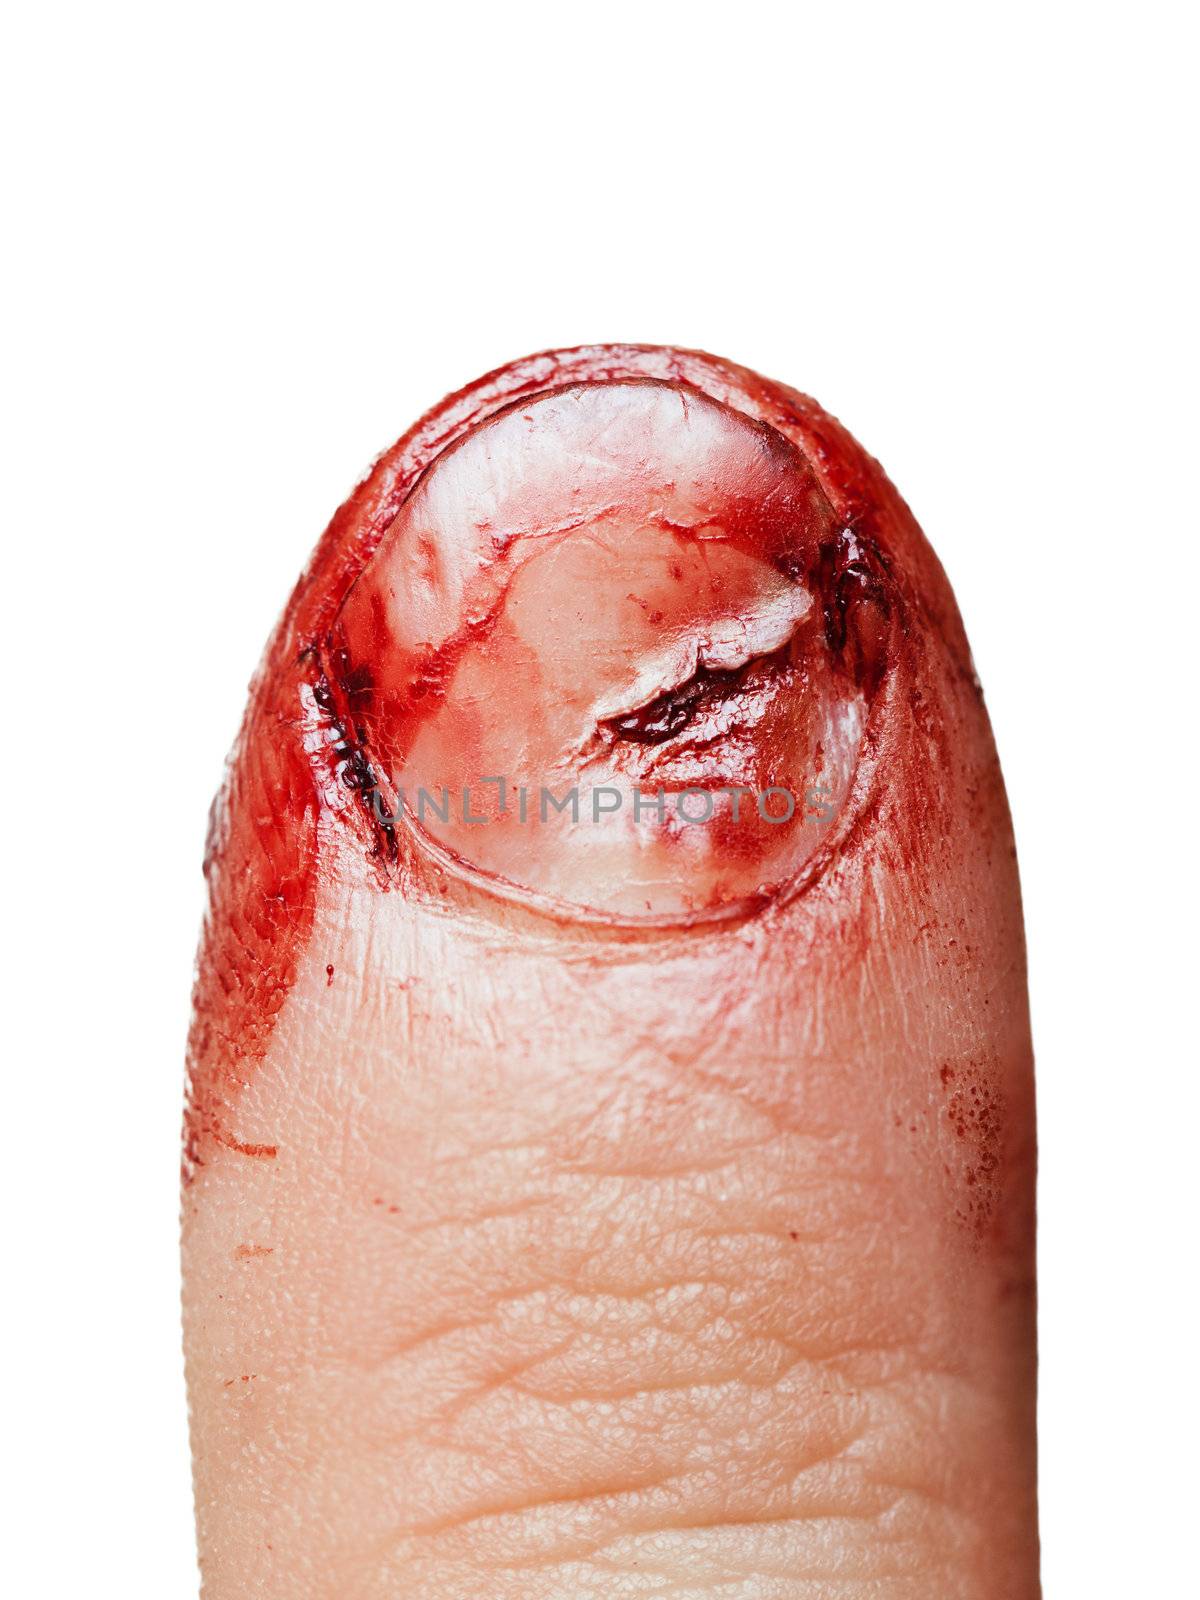 Physical injury blood wound human hand finger nail